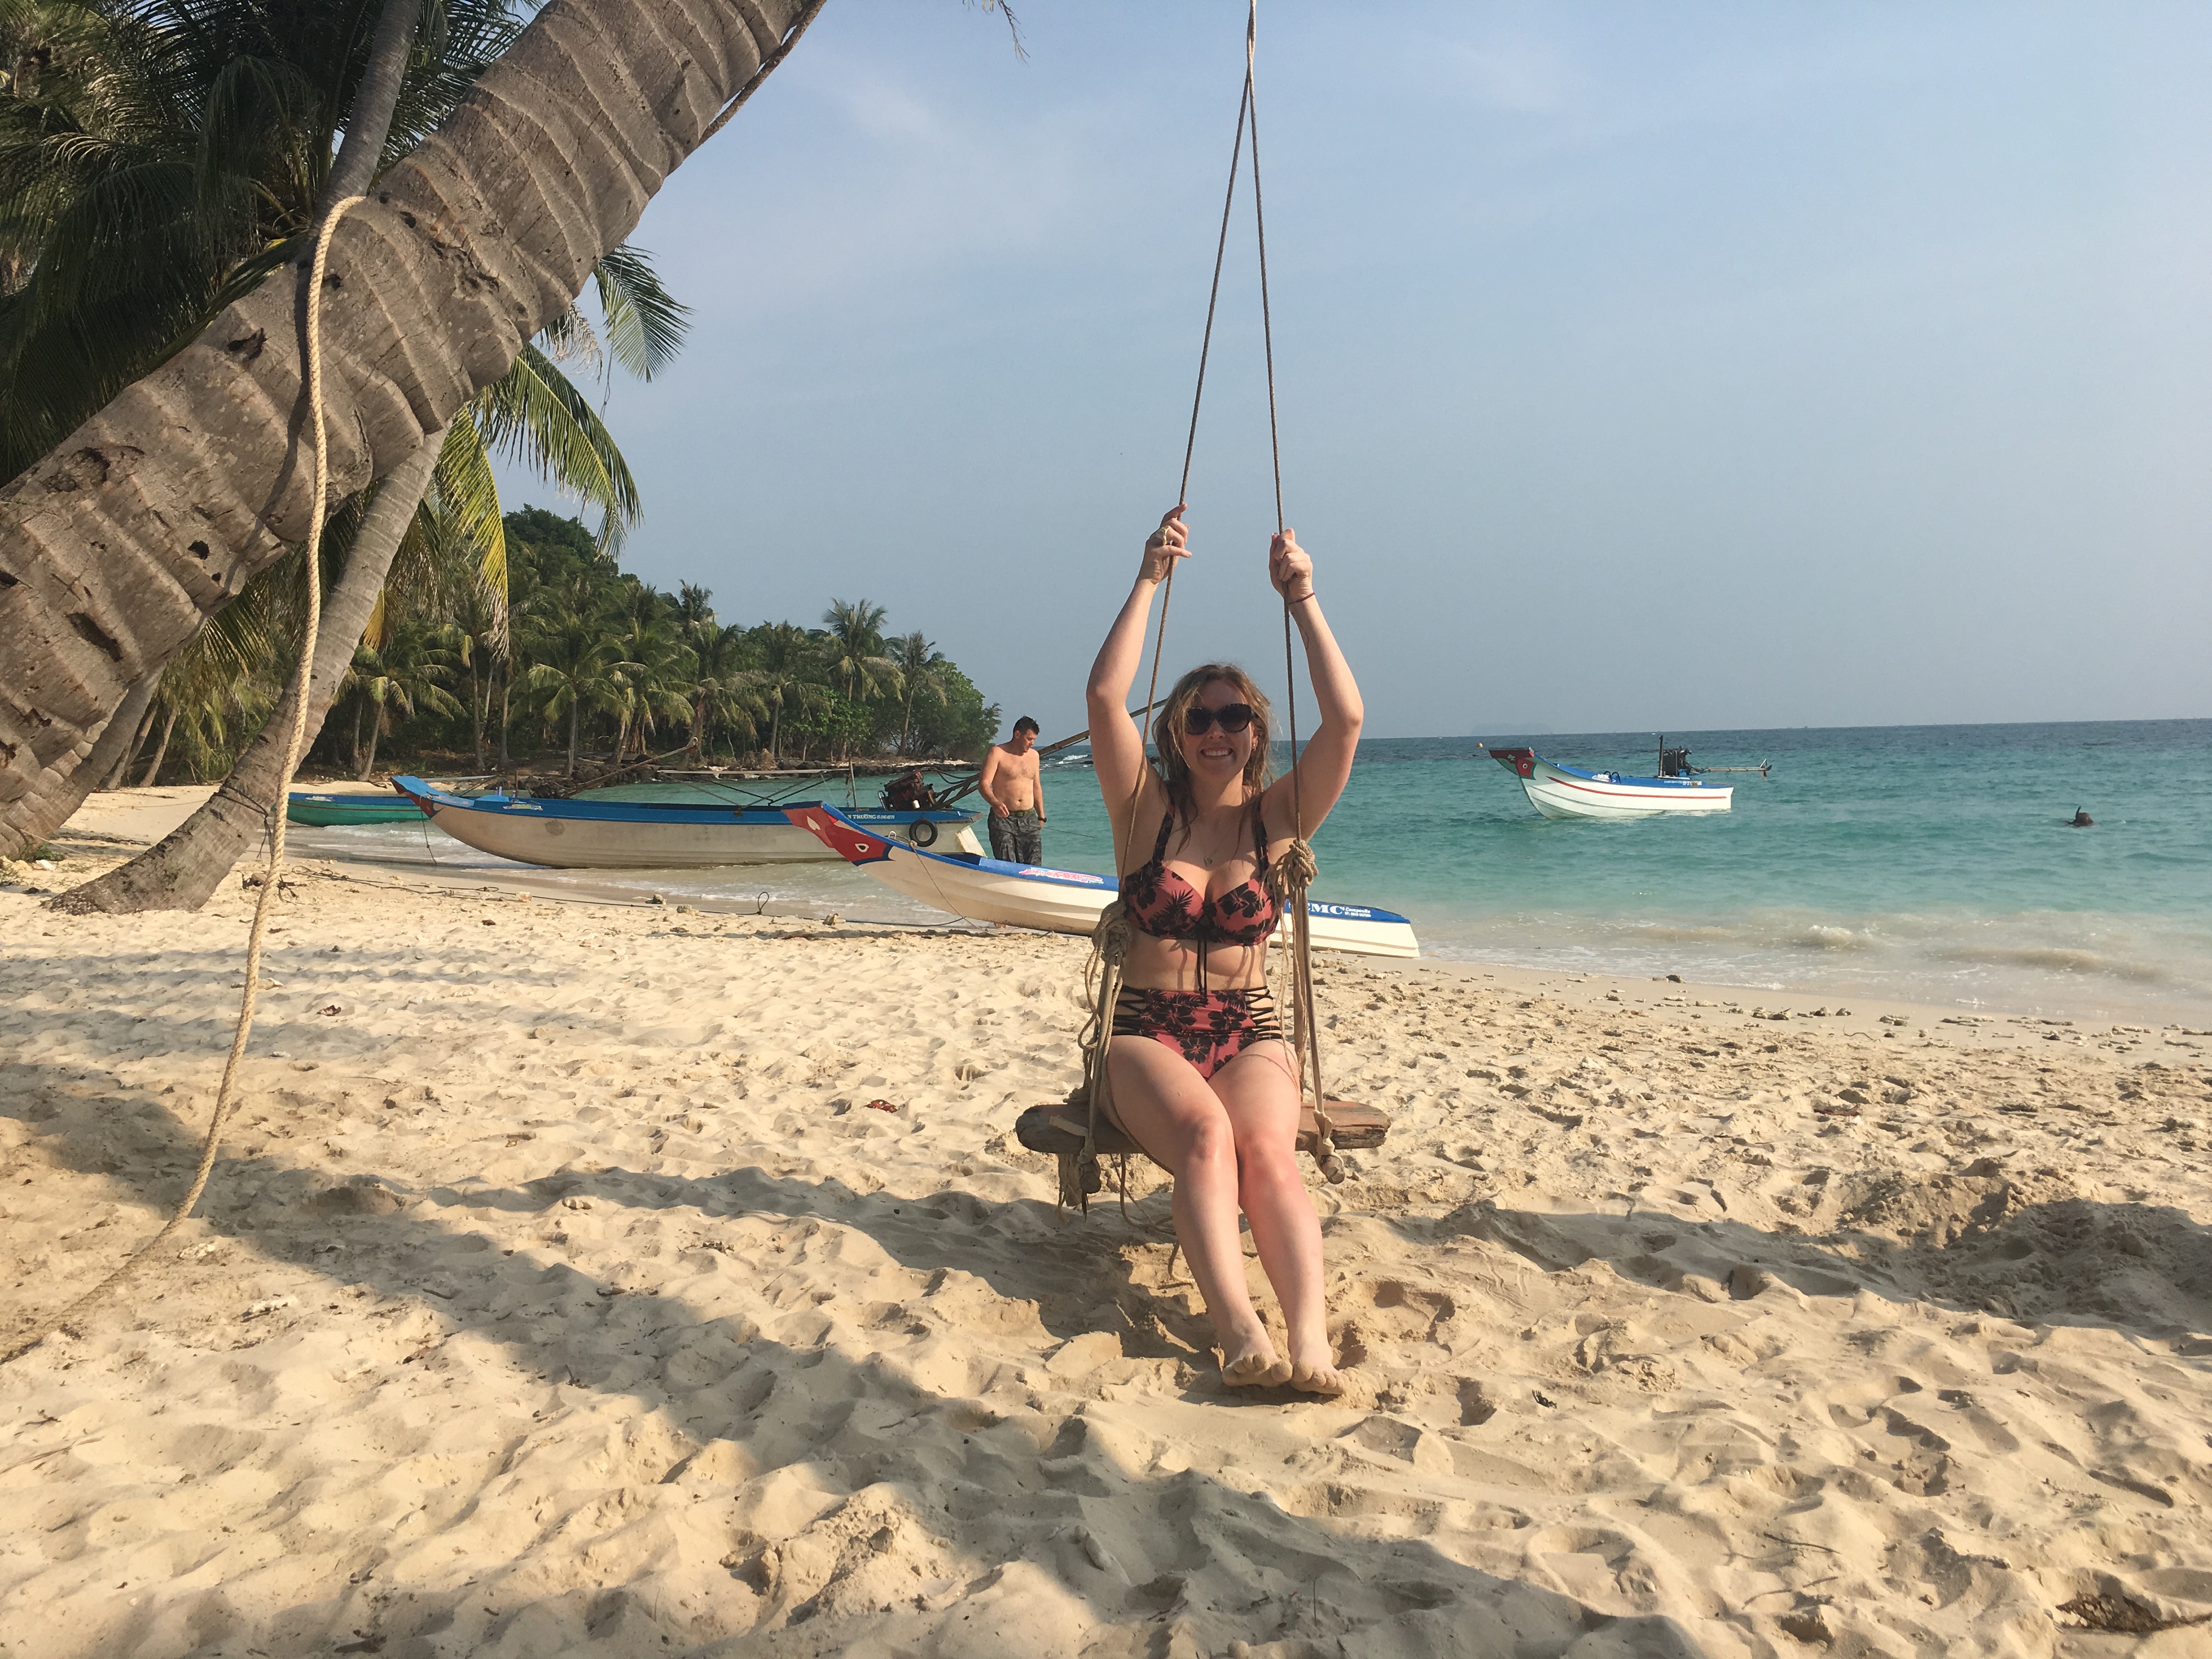 Erinn swings at the An Thoi islands of Phu Quoc, Vietnam.